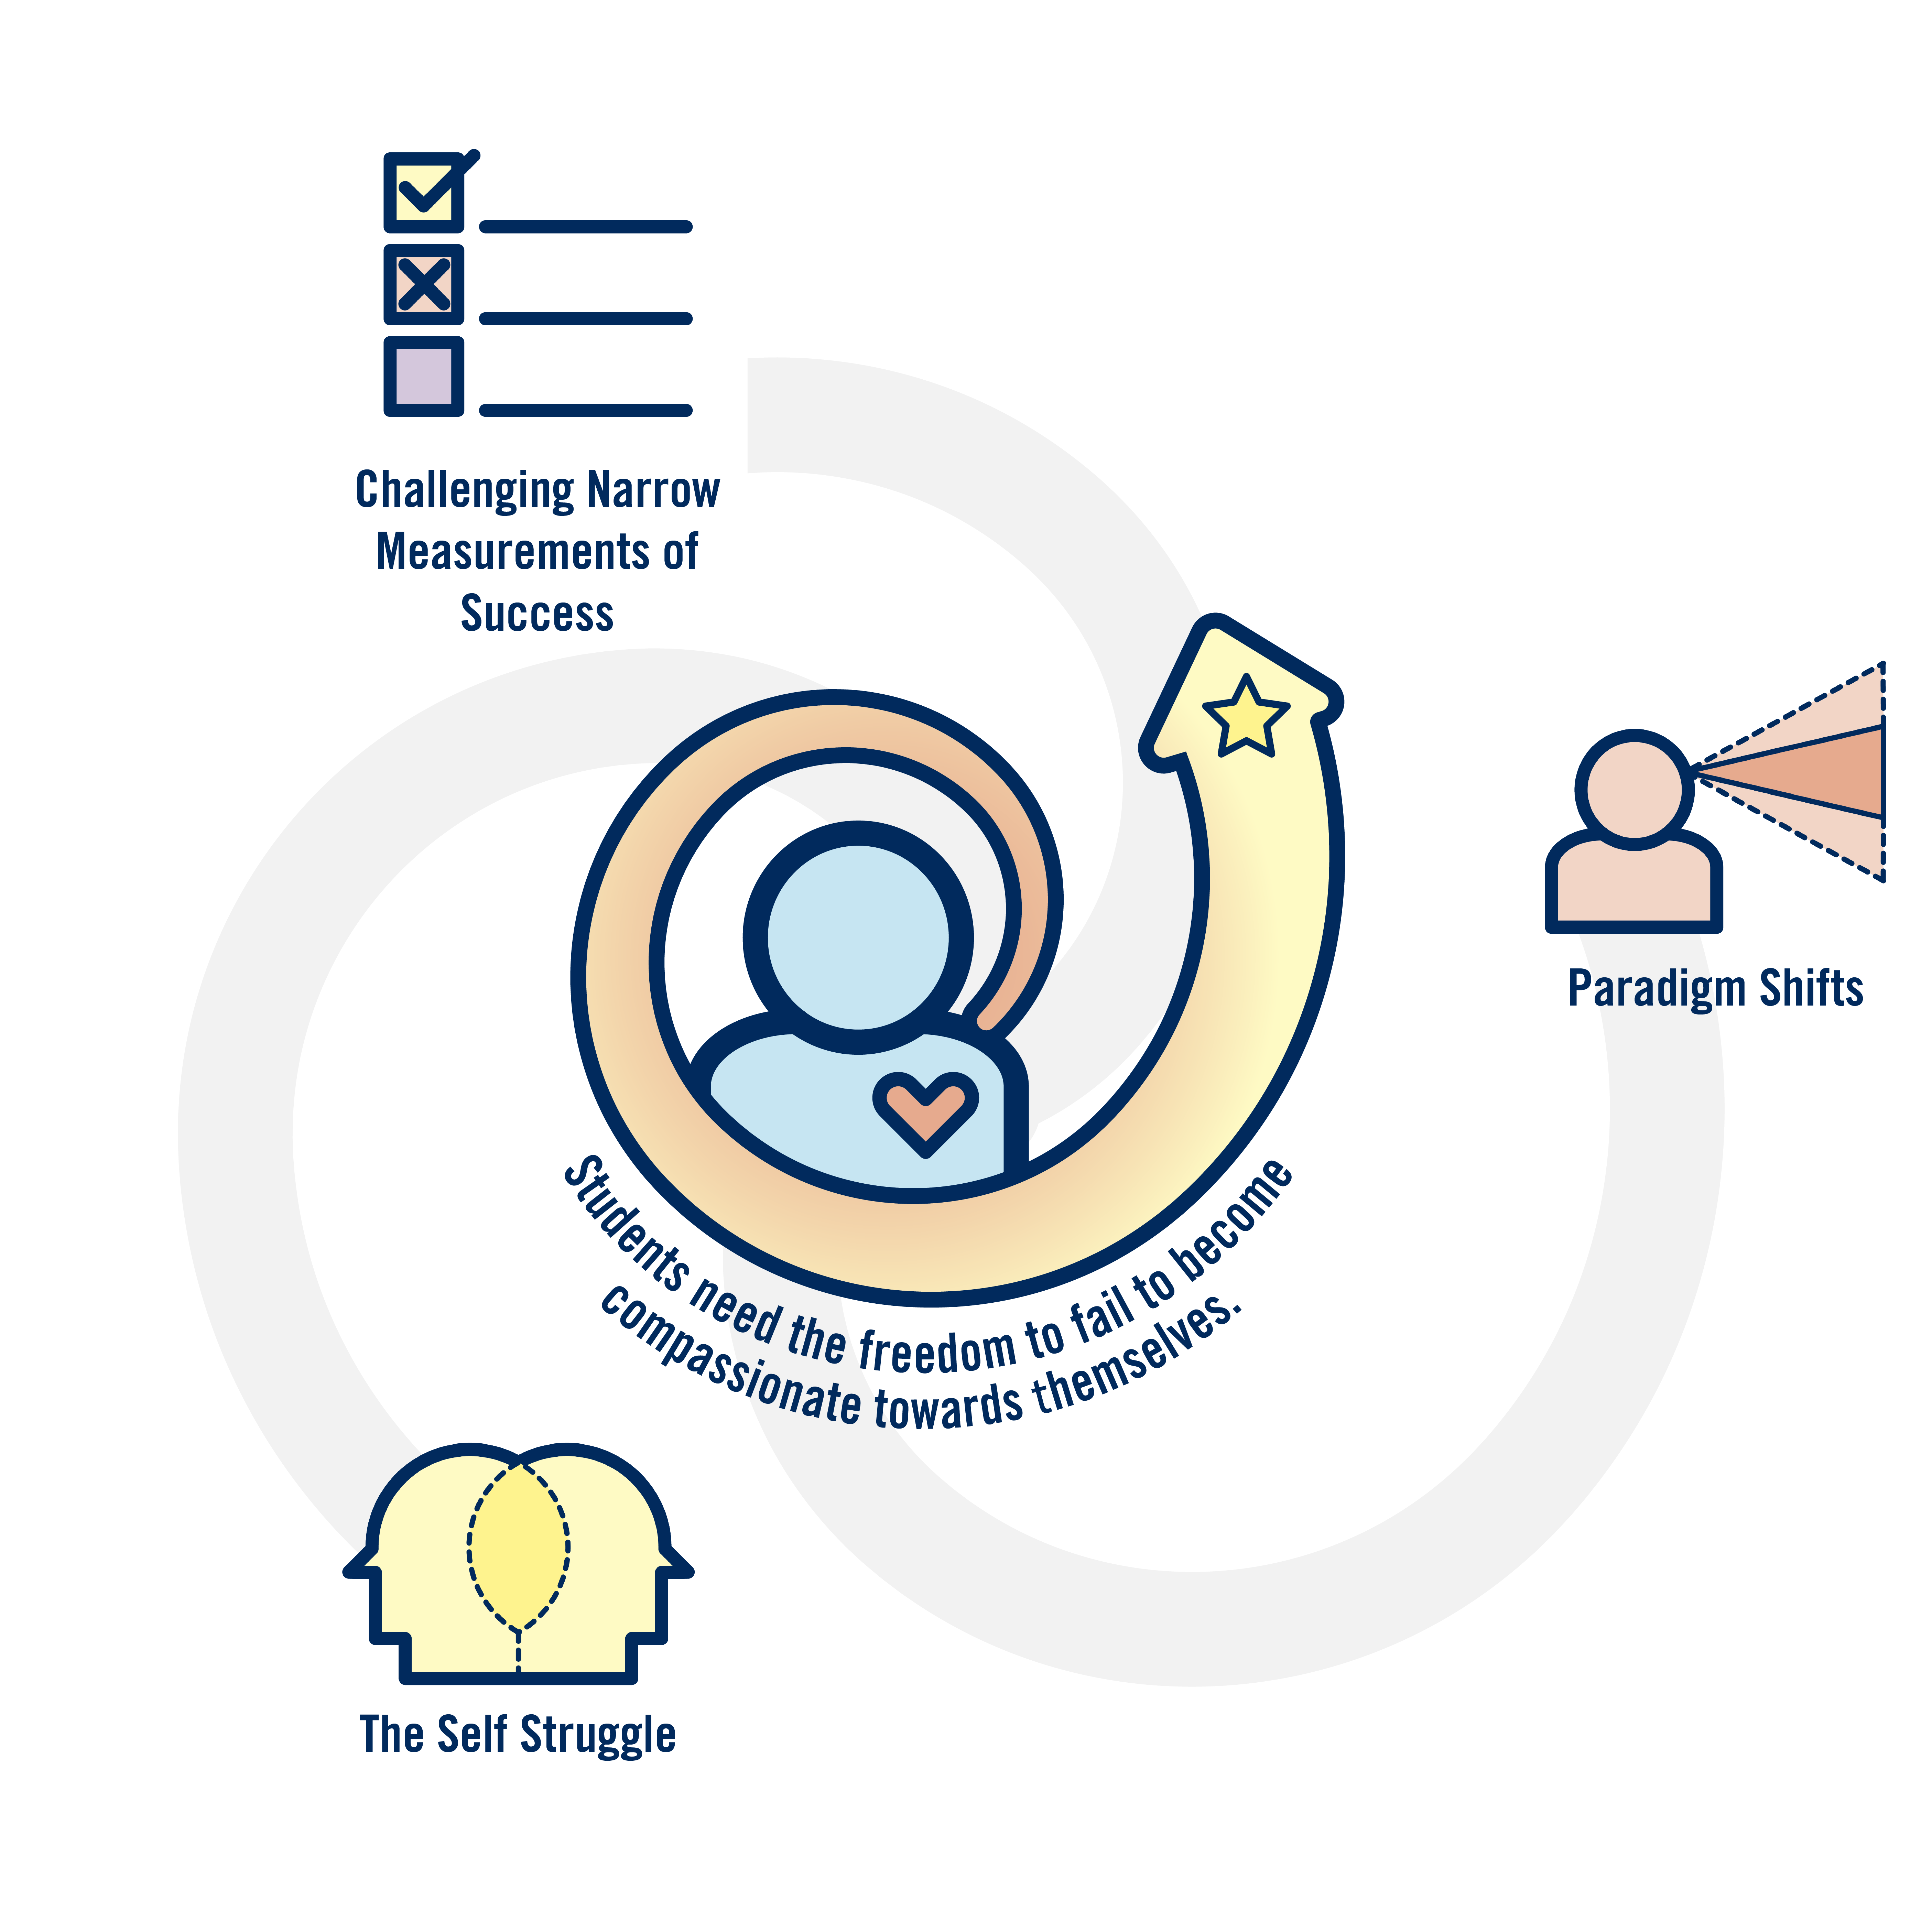 Theme visual representing the research - includes an individual at the centre, with arrows spiraling outwards representing each theme & need.